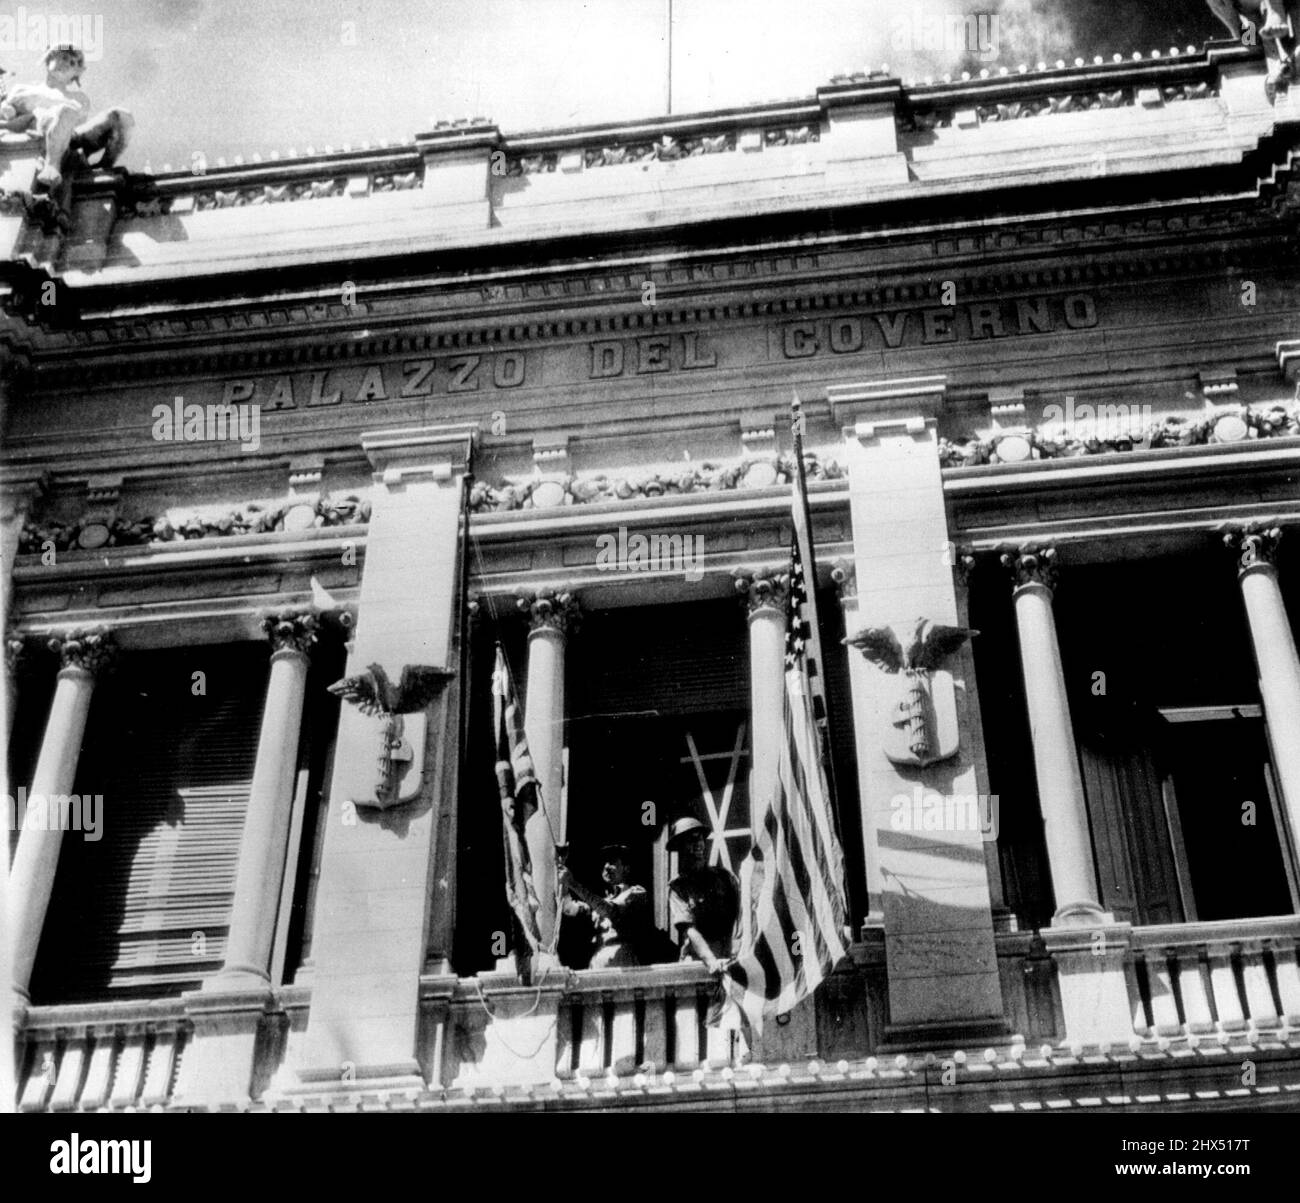 Allied Flags On Reggio Balcony -- British troops raise the stars and stripes and the union jack on the Balcony of the Palazzo Del Governo in Reggio Calabria as the Allied administration staff takes over the Italian Mainland city. This is a British Official photo. September 22, 1943. (Photo by AP Wirephoto). Stock Photo